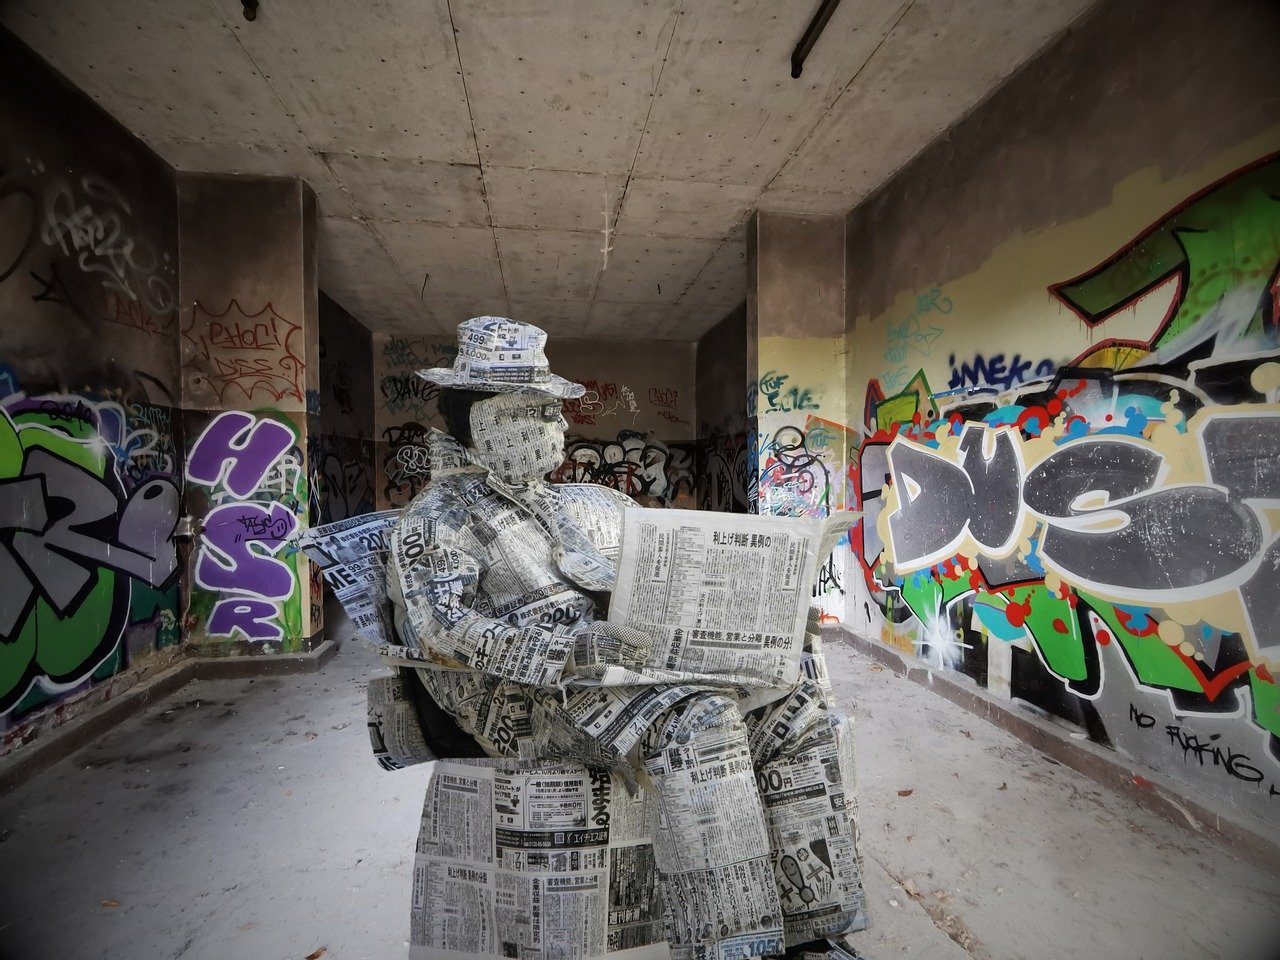 A man or statue covered in newpapers sits and reads a newspaper.